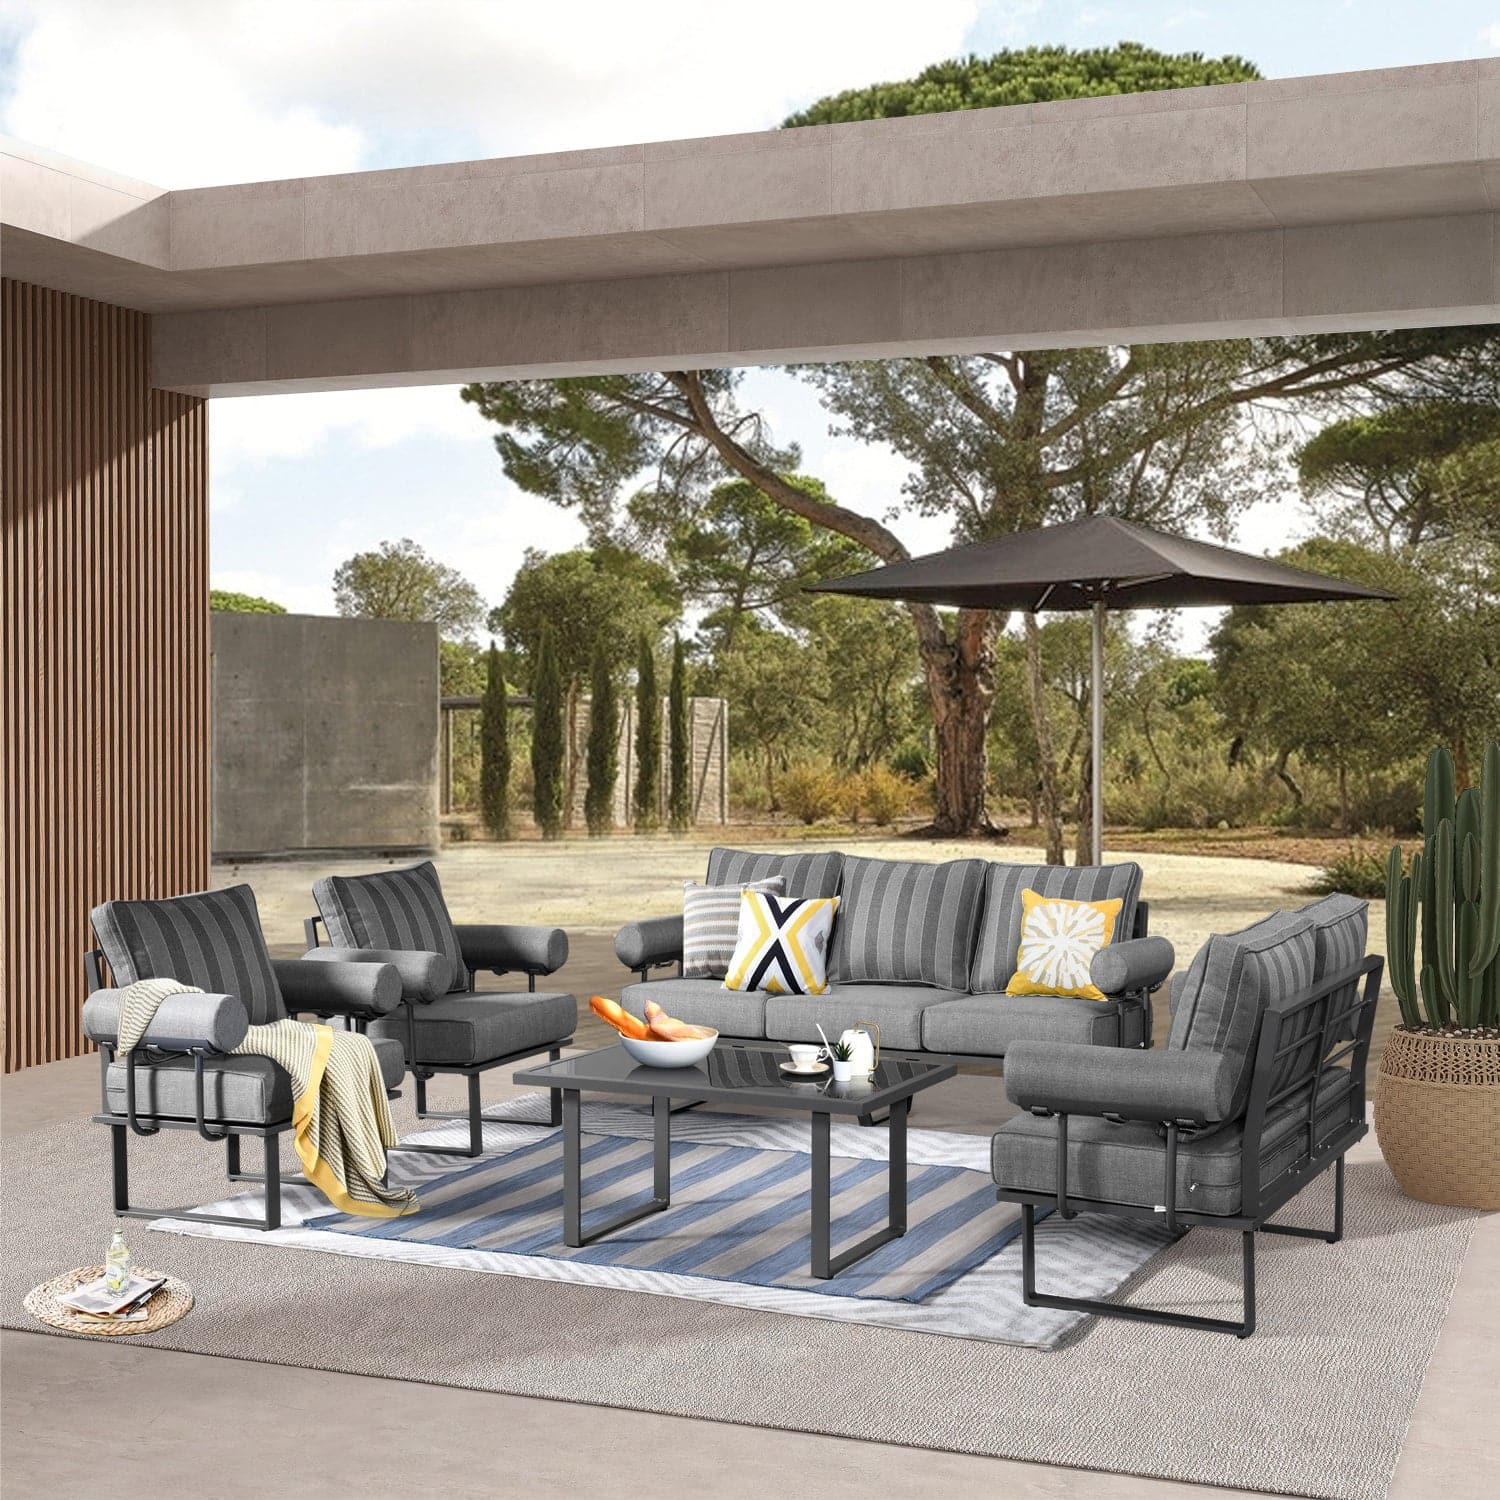 Creating a Romantic Patio Oasis for Date Night With a Loveseat